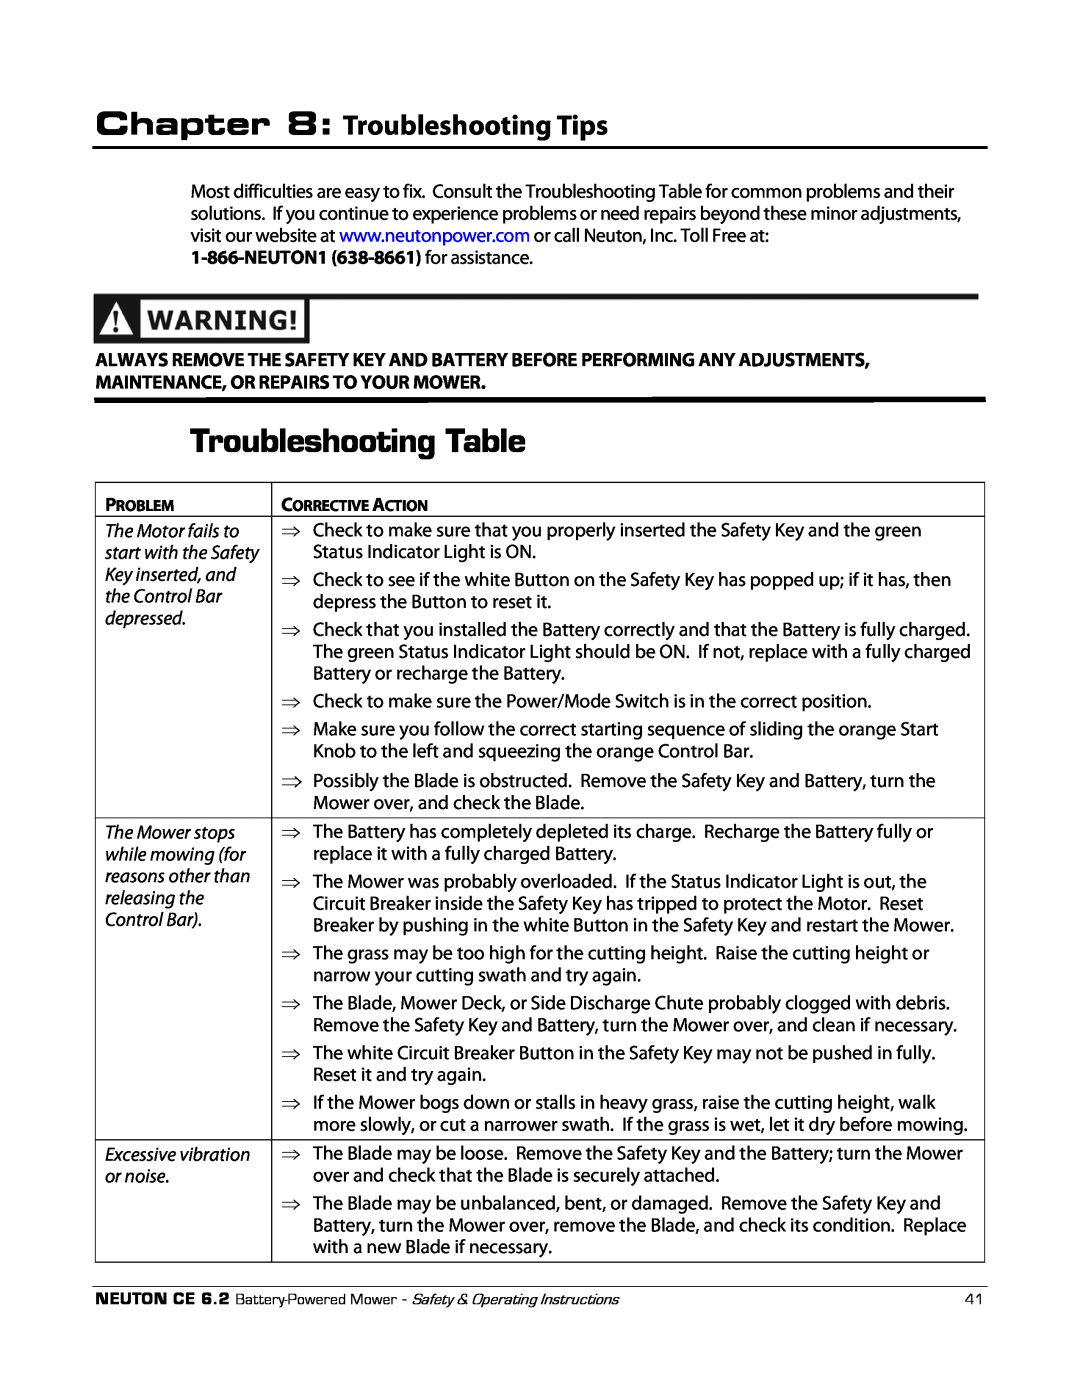 Neuton CE 6.2 manual Troubleshooting Table, Troubleshooting Tips 